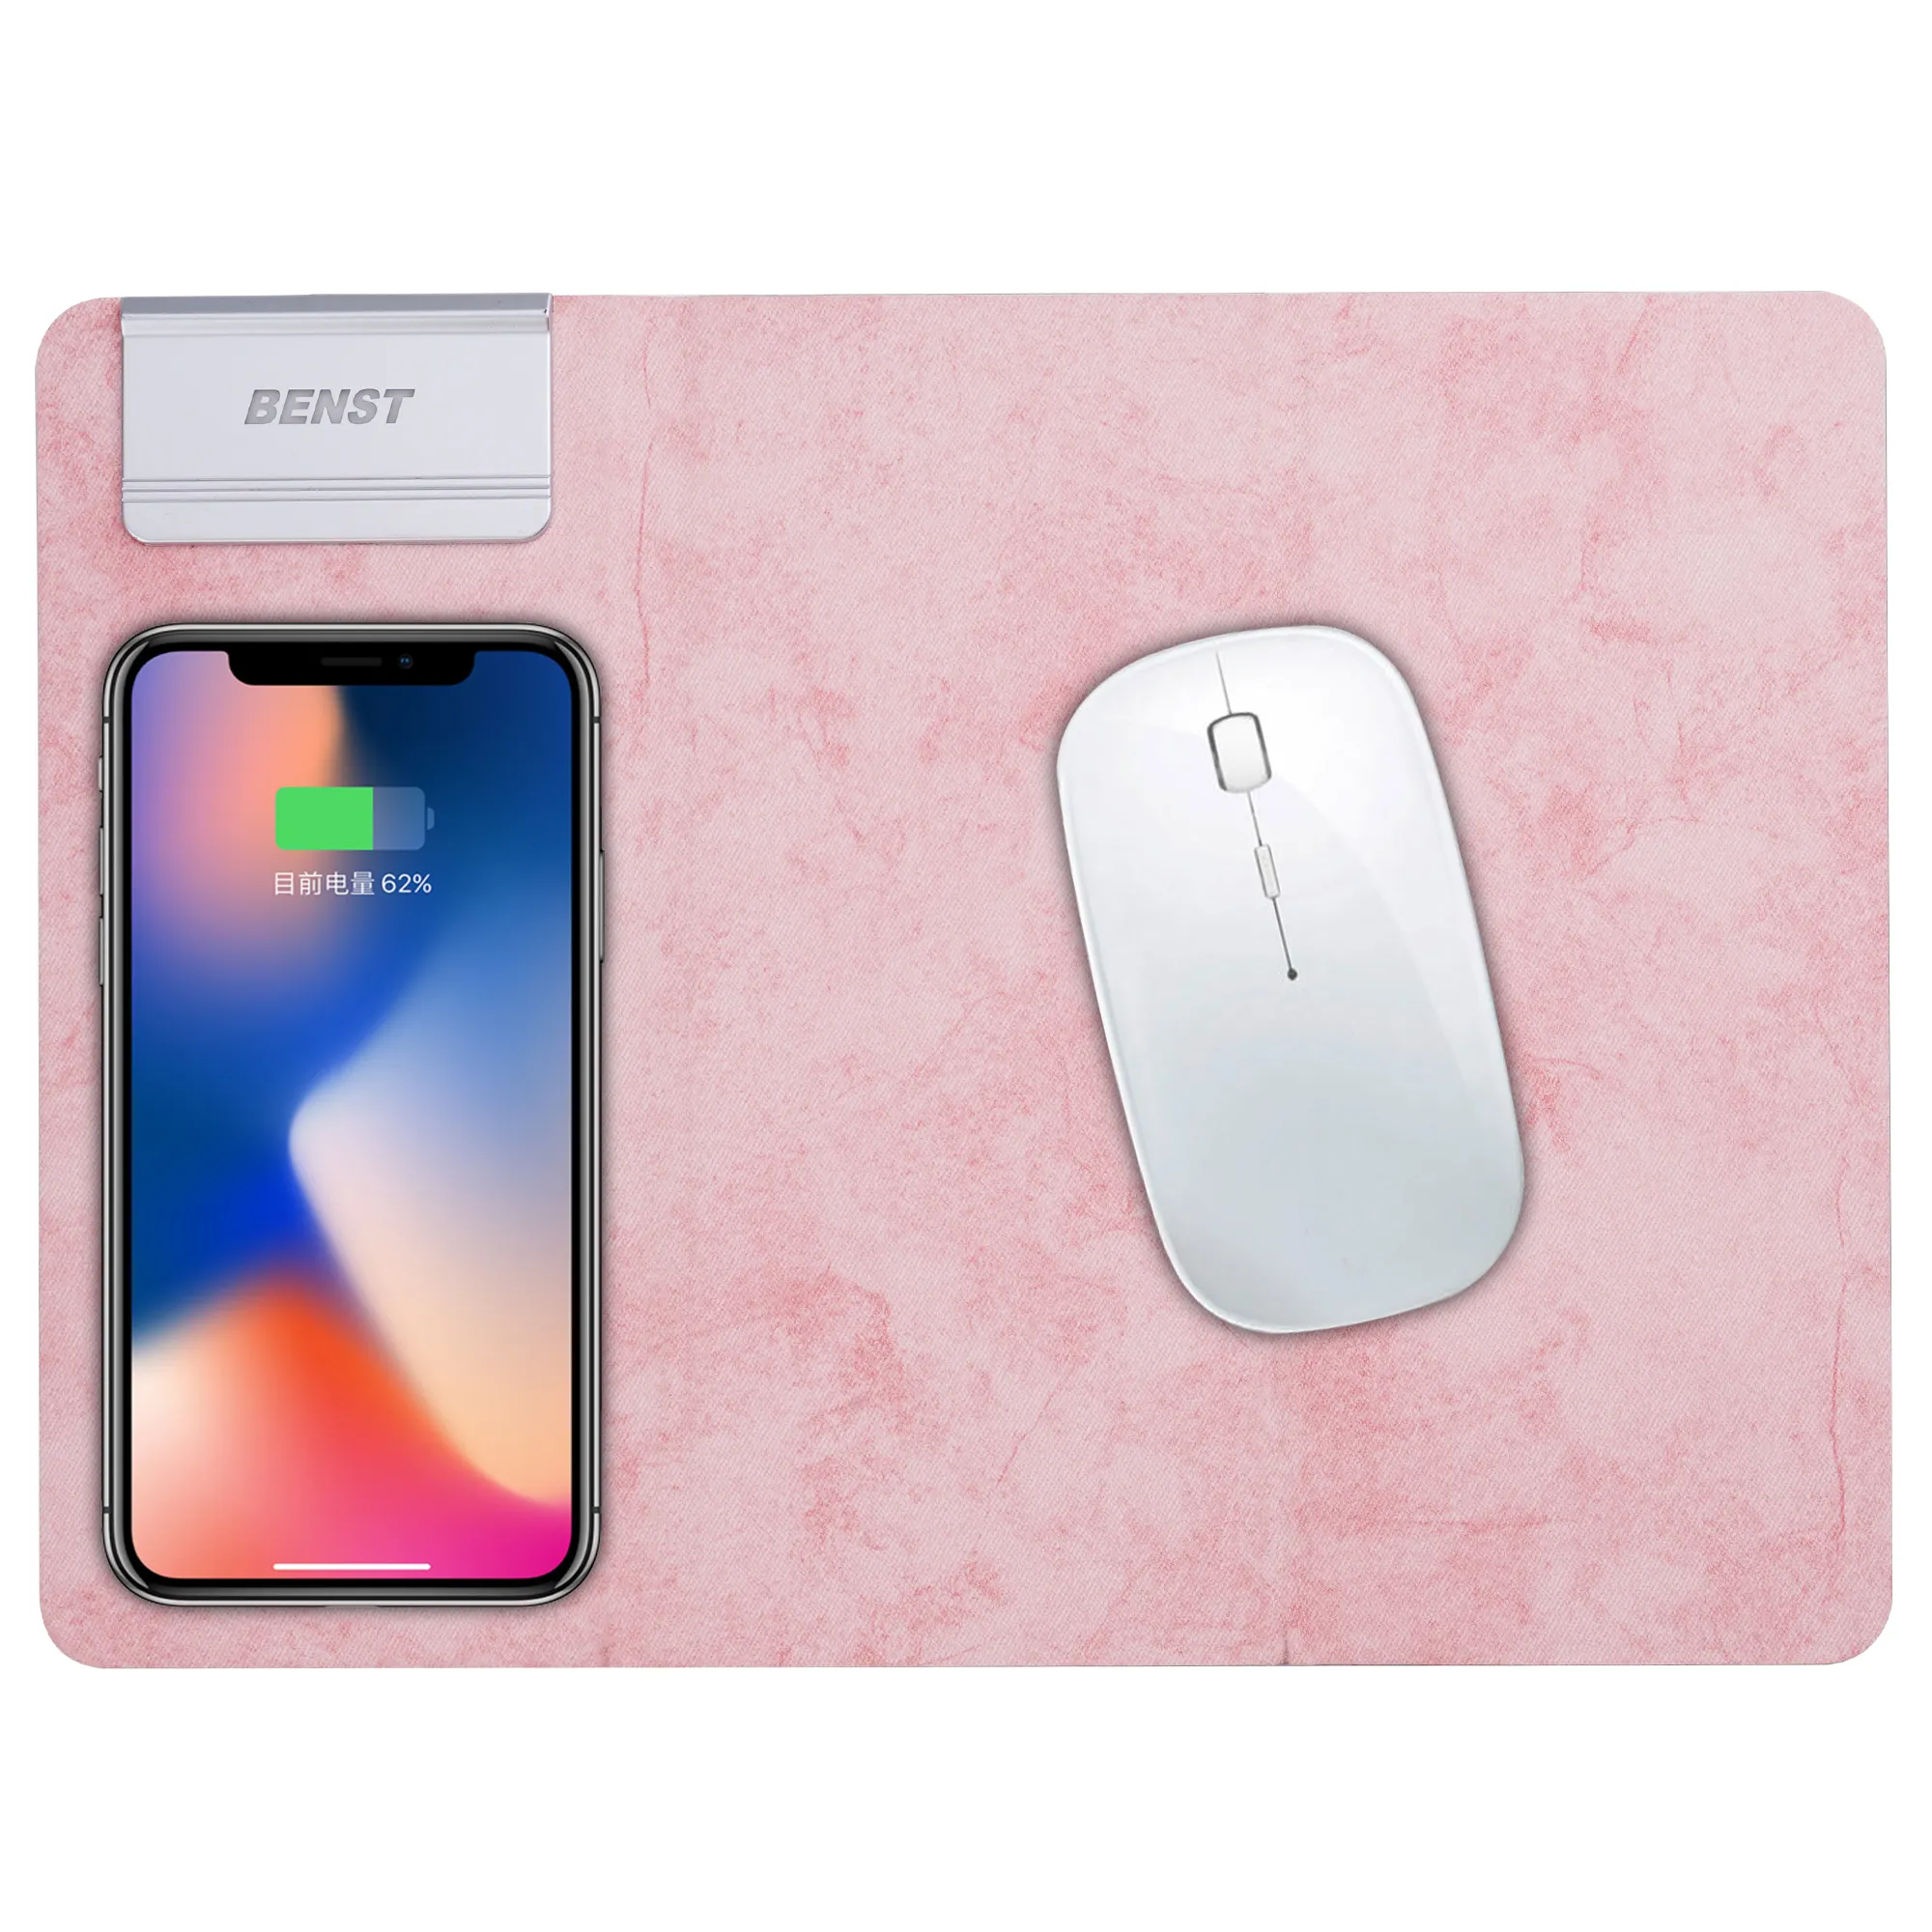 Iphone Wireless Charger Mouse Pad Fast Wireless Charger For Samsung Galaxy S10/s9/s8 Plus Note 9/8 For Iphone Xs Max/xr/x/ Xs /8/8 Plus